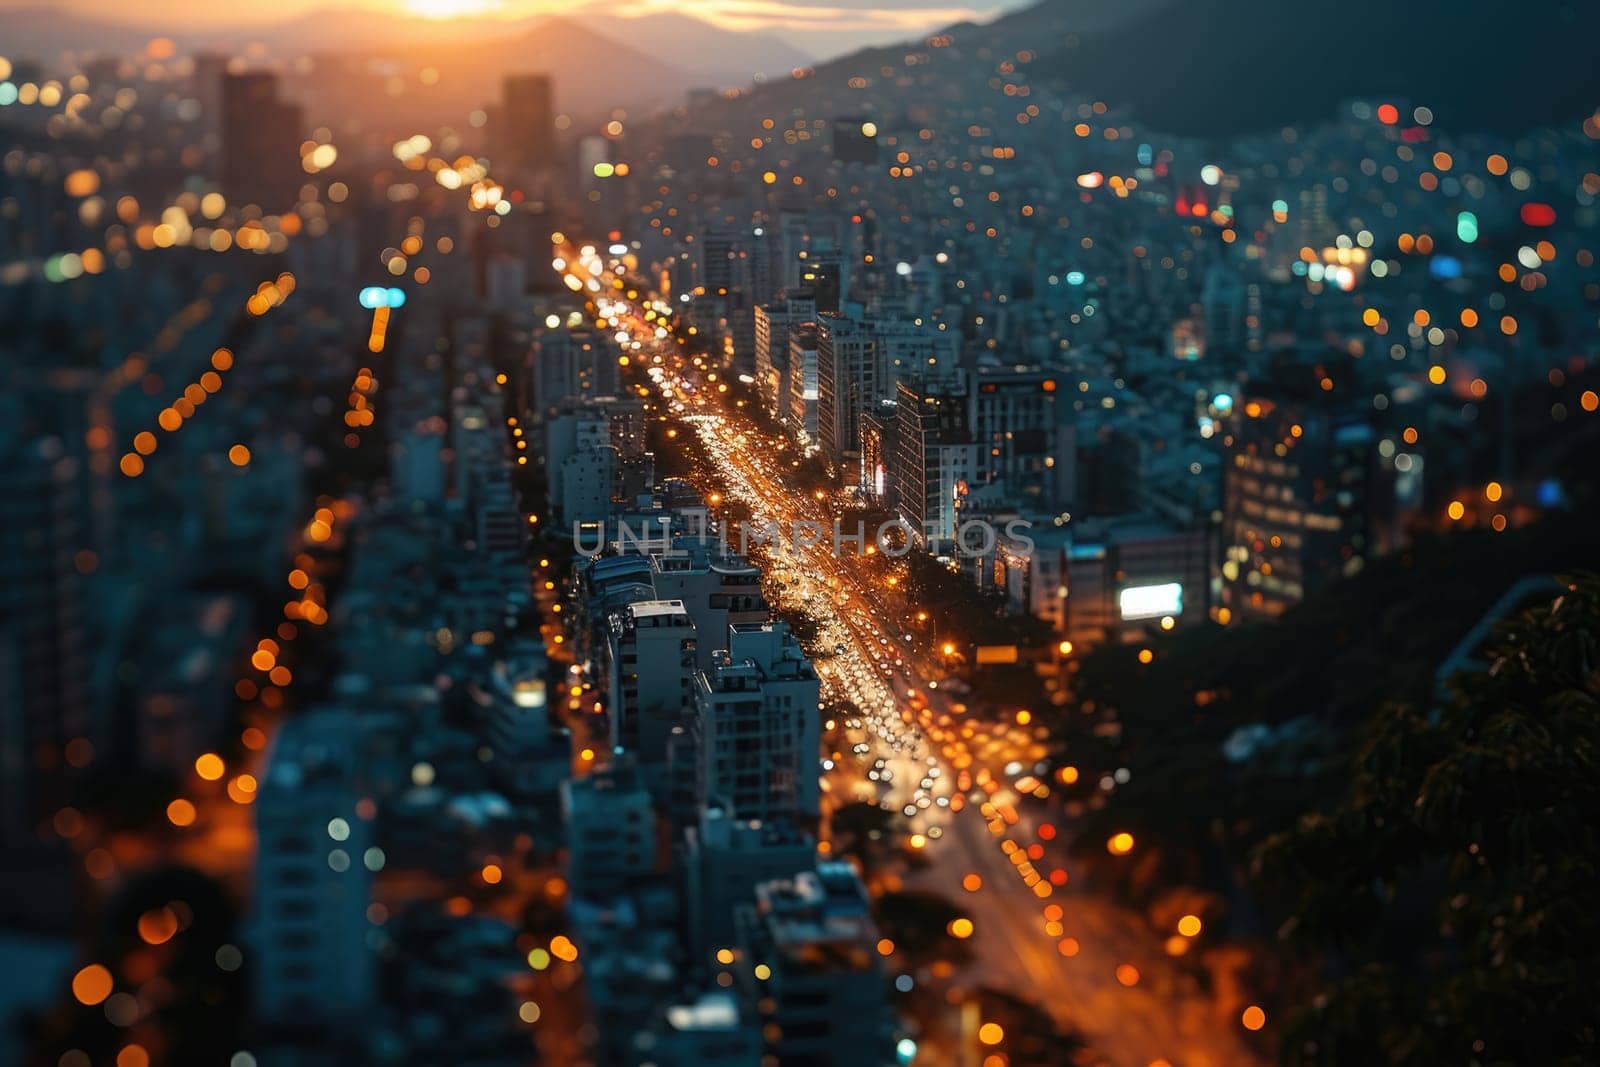 Aerial view of a city street at night time, long exposure of the car lights.